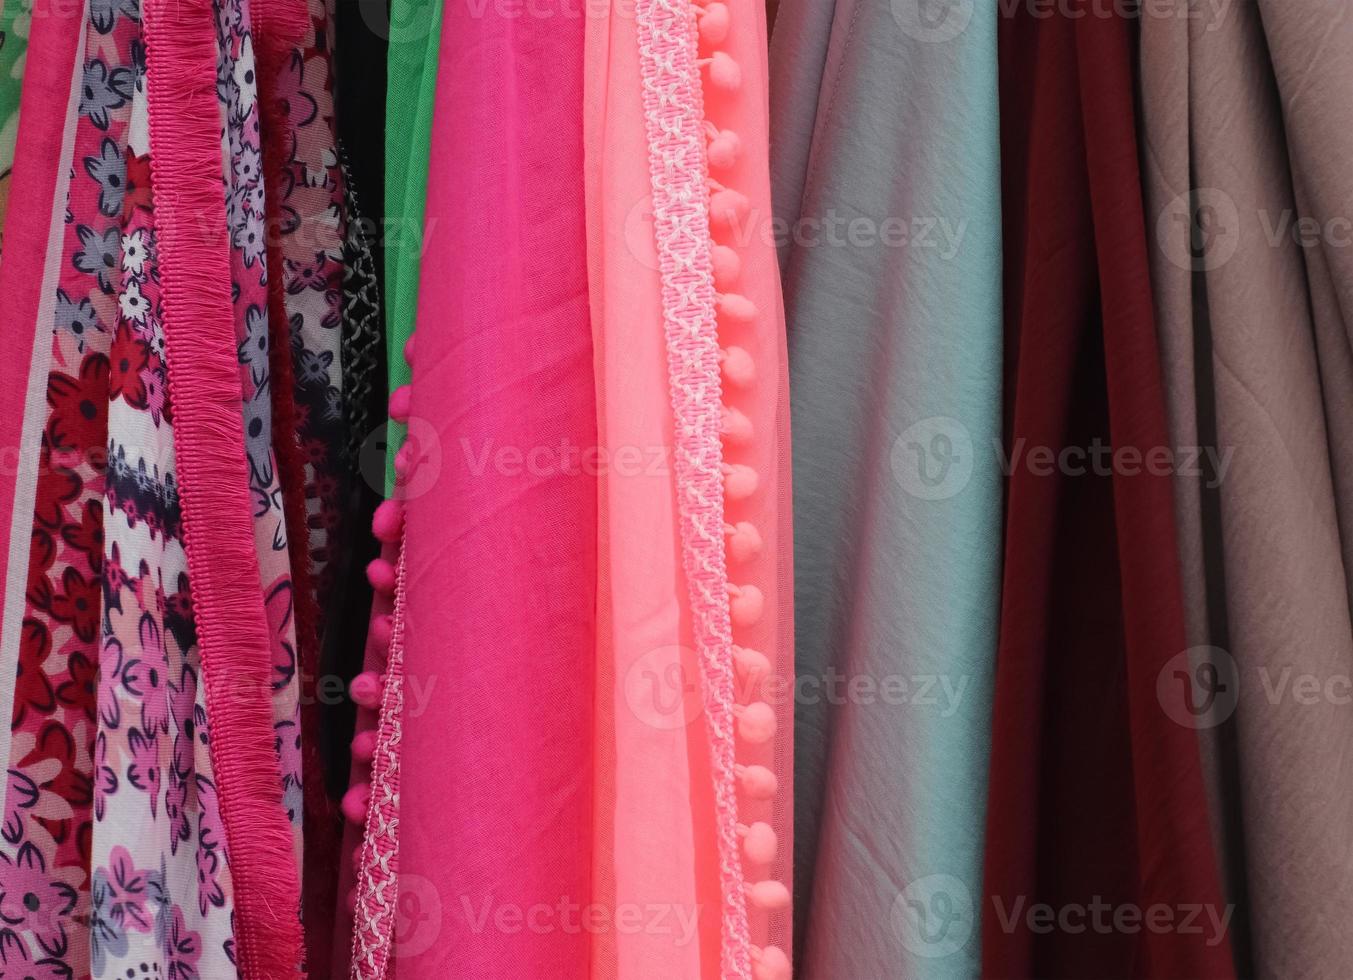 Samples of cloth and fabrics in different colors found at a fabrics market in Germany photo